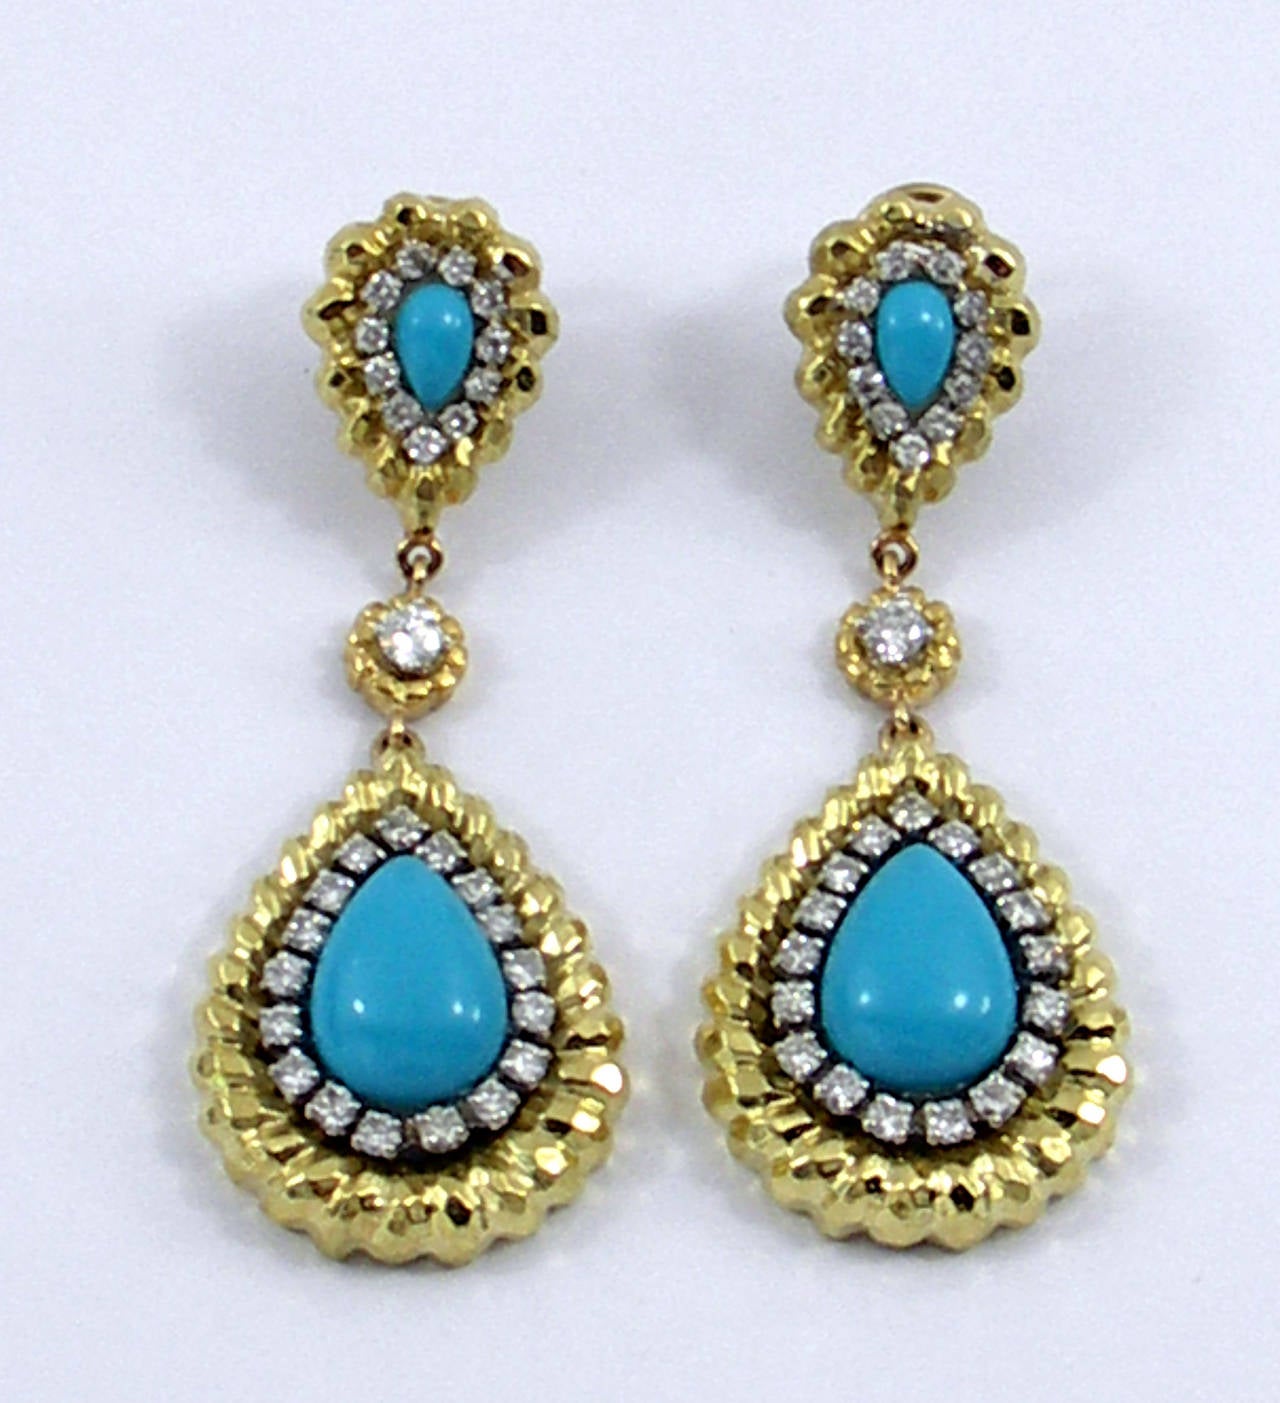 A pair of 18K yellow gold earrings, measuring 2 5/8 inches long. The top of each earring is set with a pear shaped turquoise measuring 5mm X 8mm, and the bottom of each earring has a 11mm X 16mm turquoise. These beautiful earrings are set with